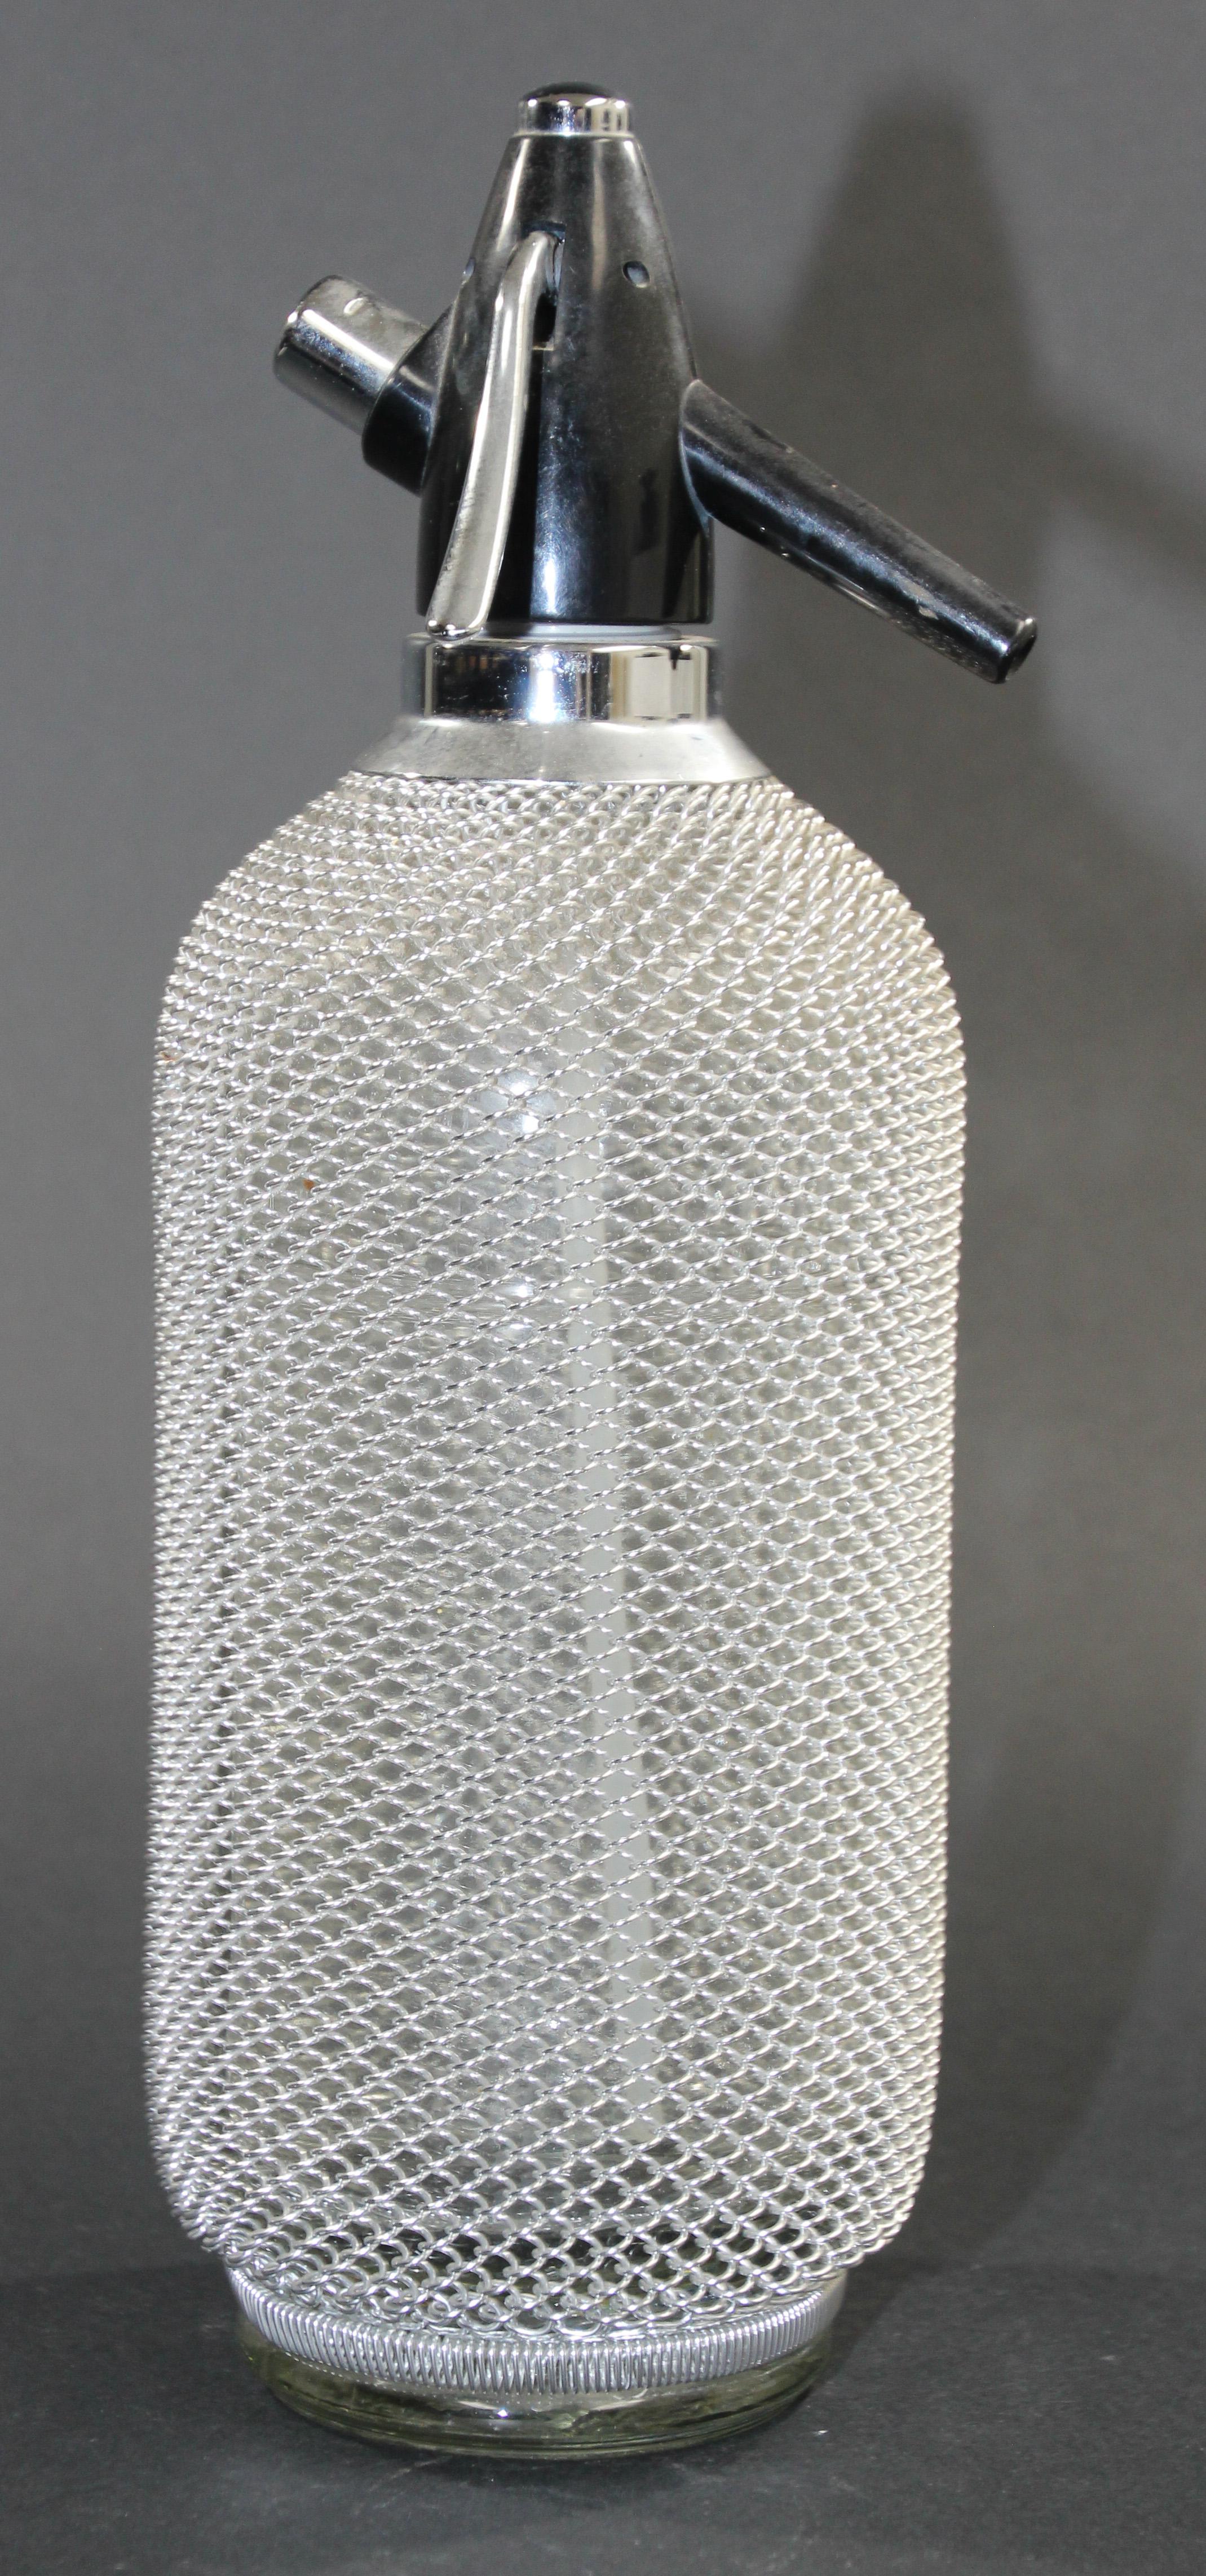 European Vintage Classic Soda Siphon Seltzer Glass Bottle with Wire Mesh